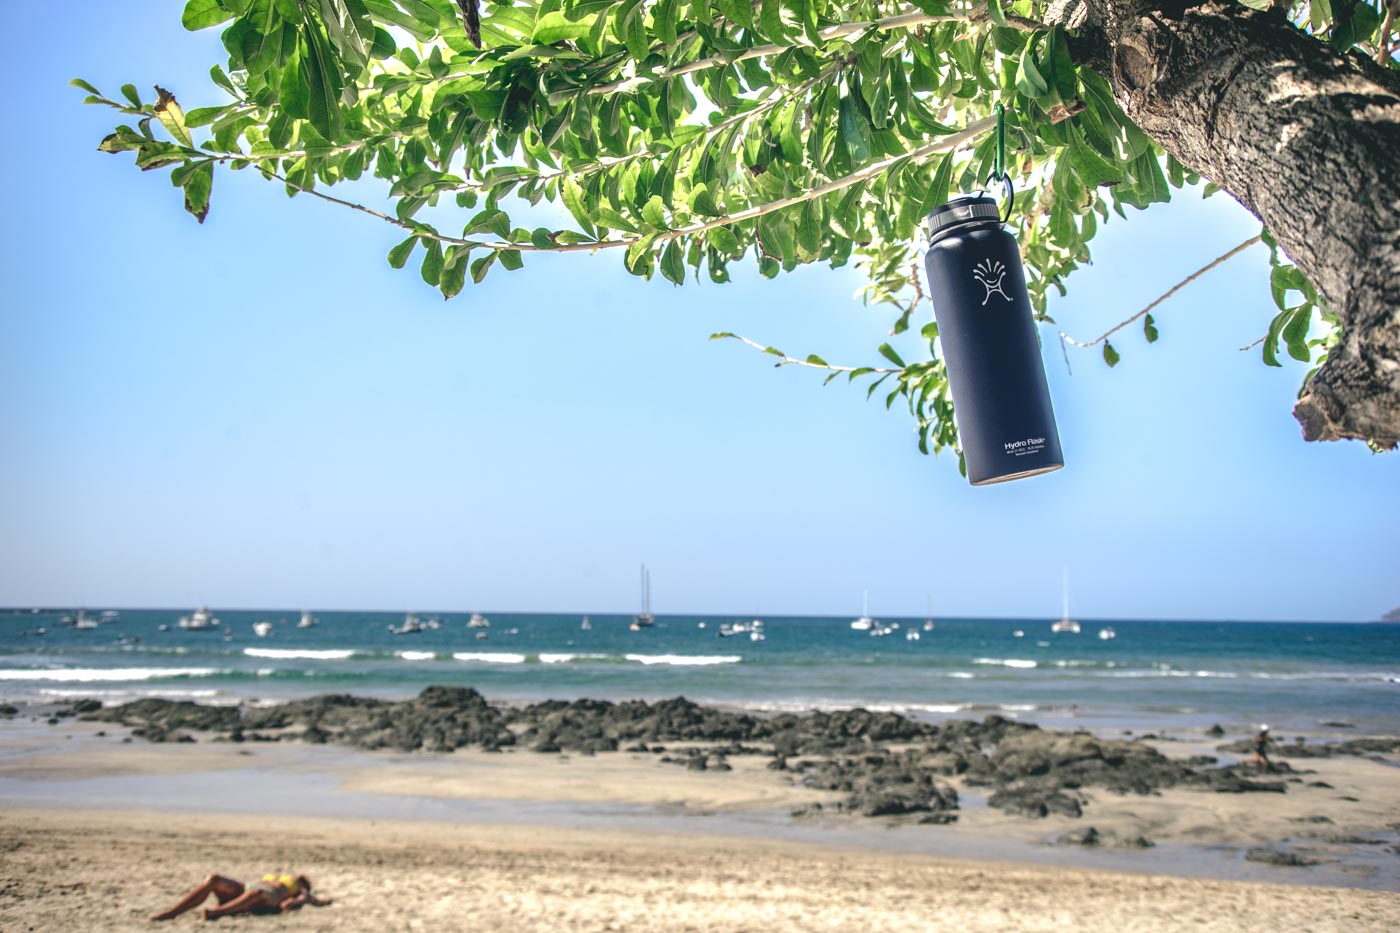 Tayrona National Park: We don't go anywhere without our Hyrdroflask! Parque Tayrona